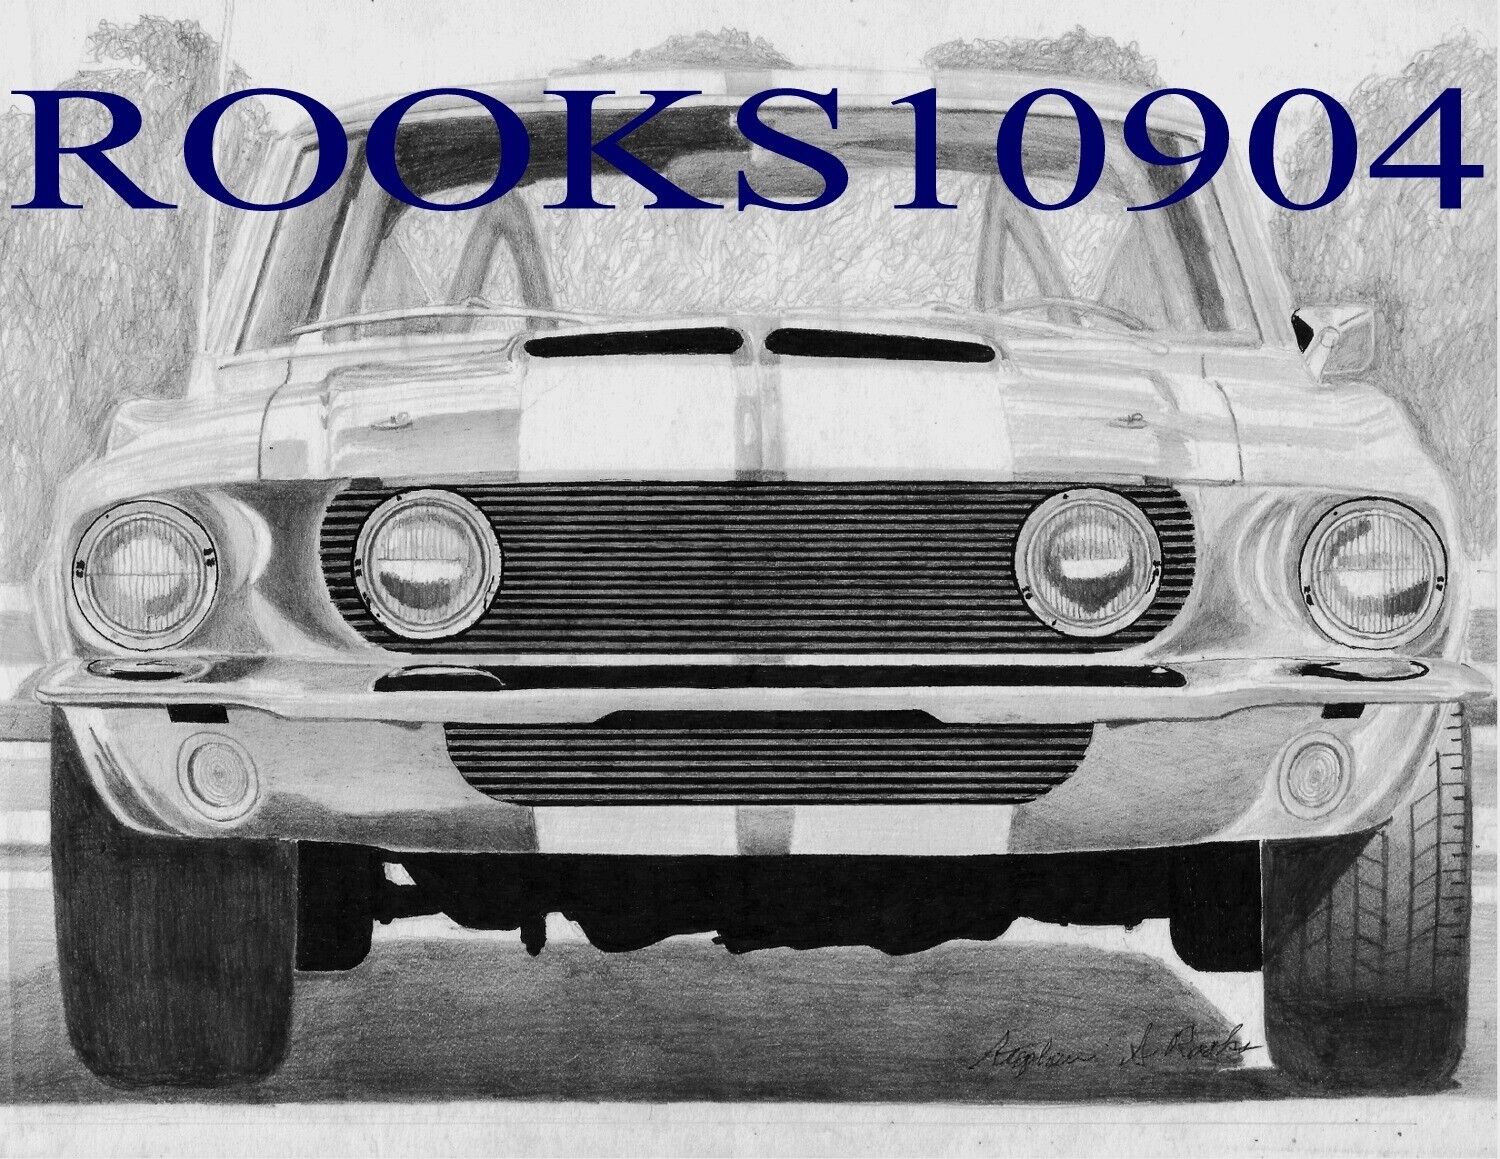 1967 Shelby GT500 Front View CLASSIC CAR ART PRINT